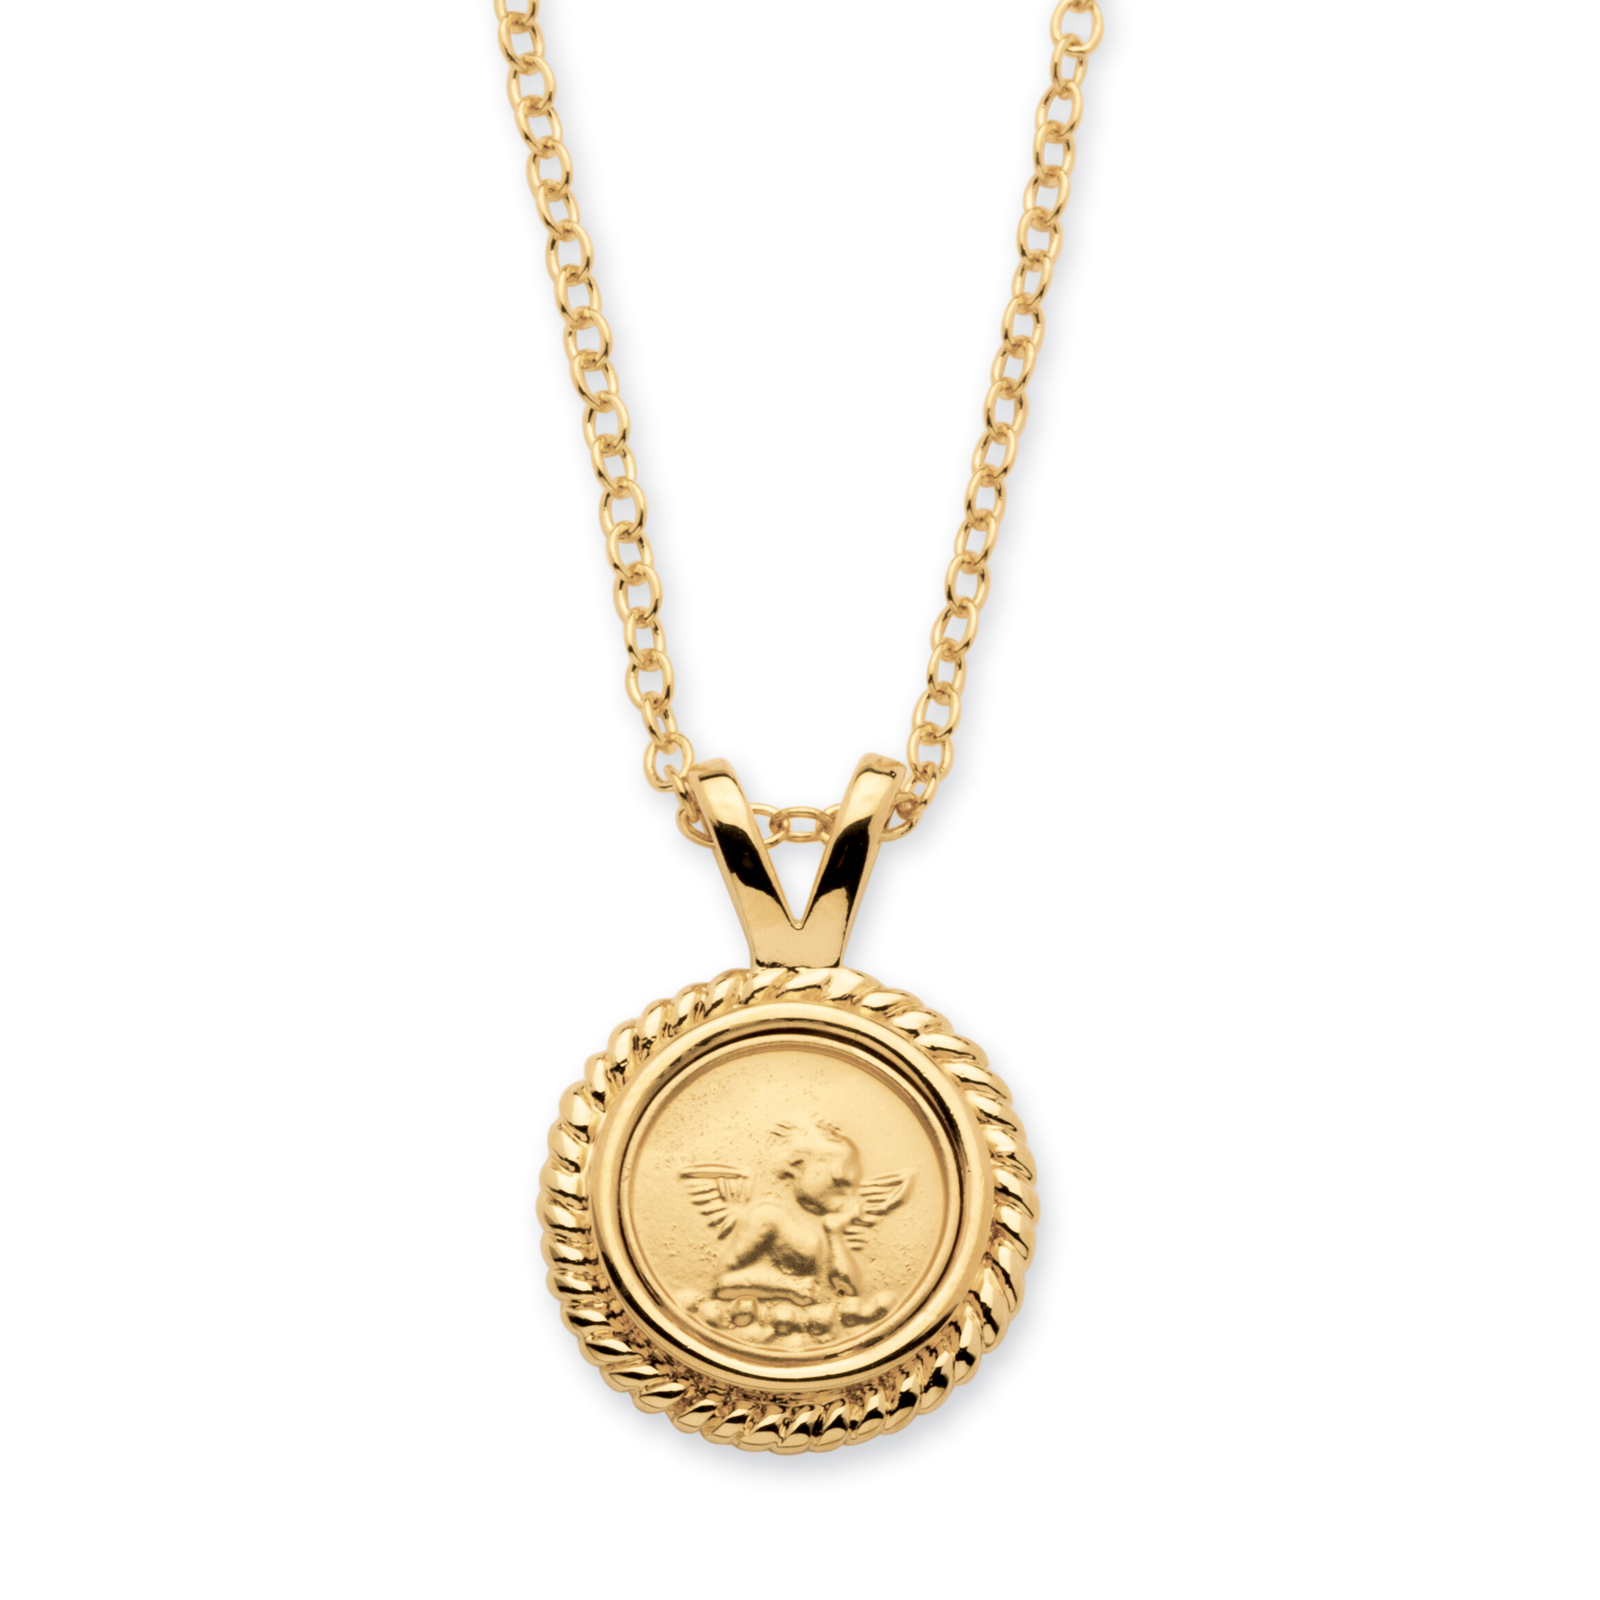 PalmBeach Jewelry Guardian Angel Charm Necklace in Yellow Gold-Plated 18" - $34.47